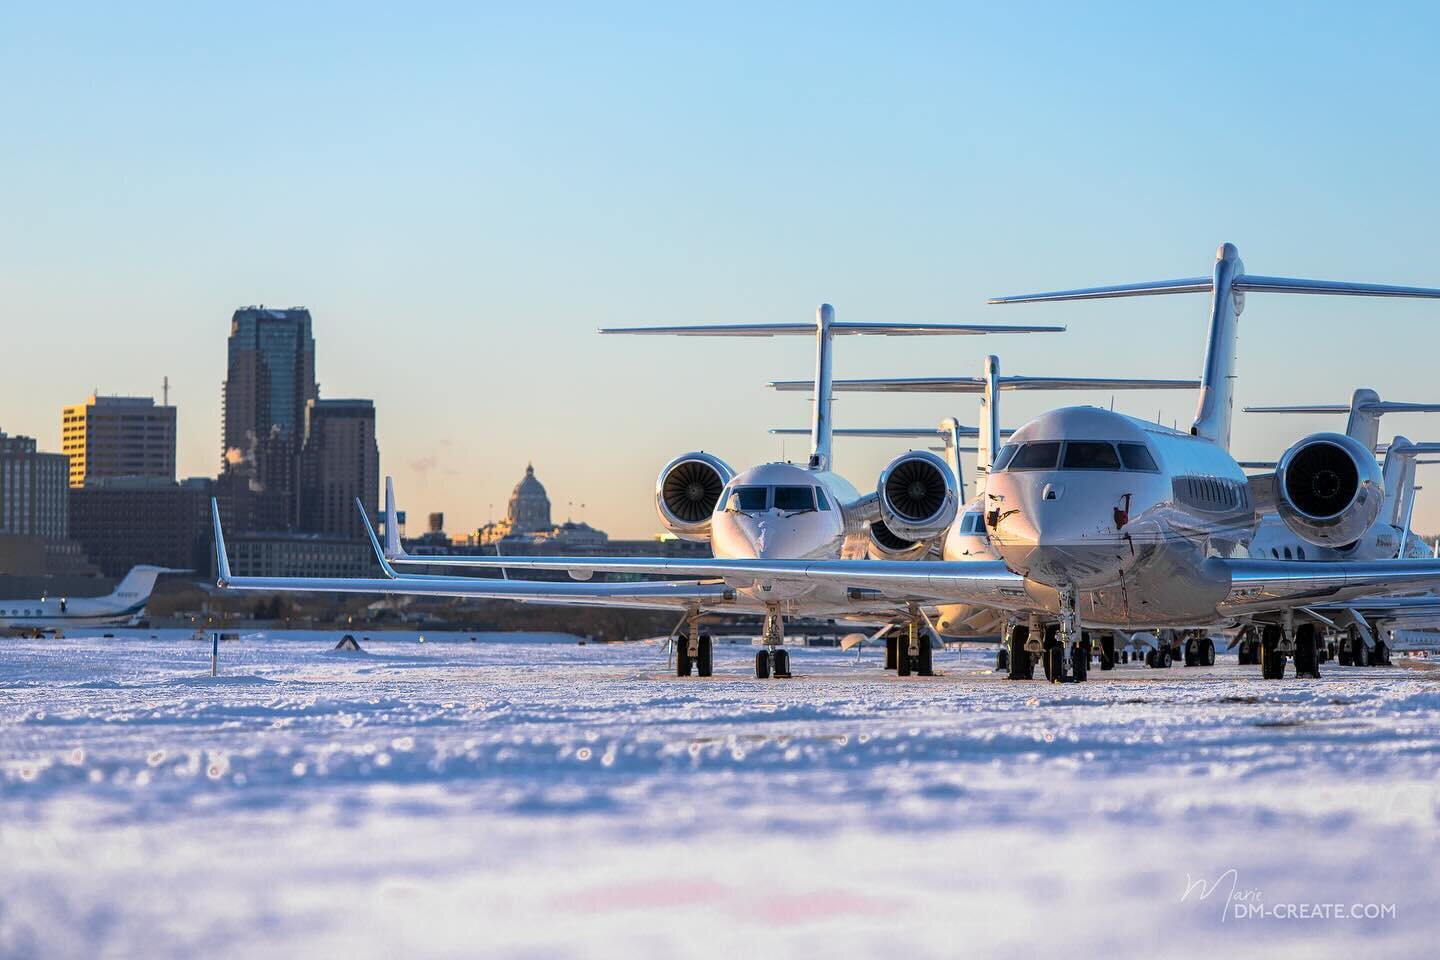 What does today have in common with a year ago?  Six years ago I was standing on the Tarmac at St. Paul Airport.  Why? We were asked to document this airport and it&rsquo;s traffic. Why? The Super Bowl held in the cold Bold North. 

You watched the g